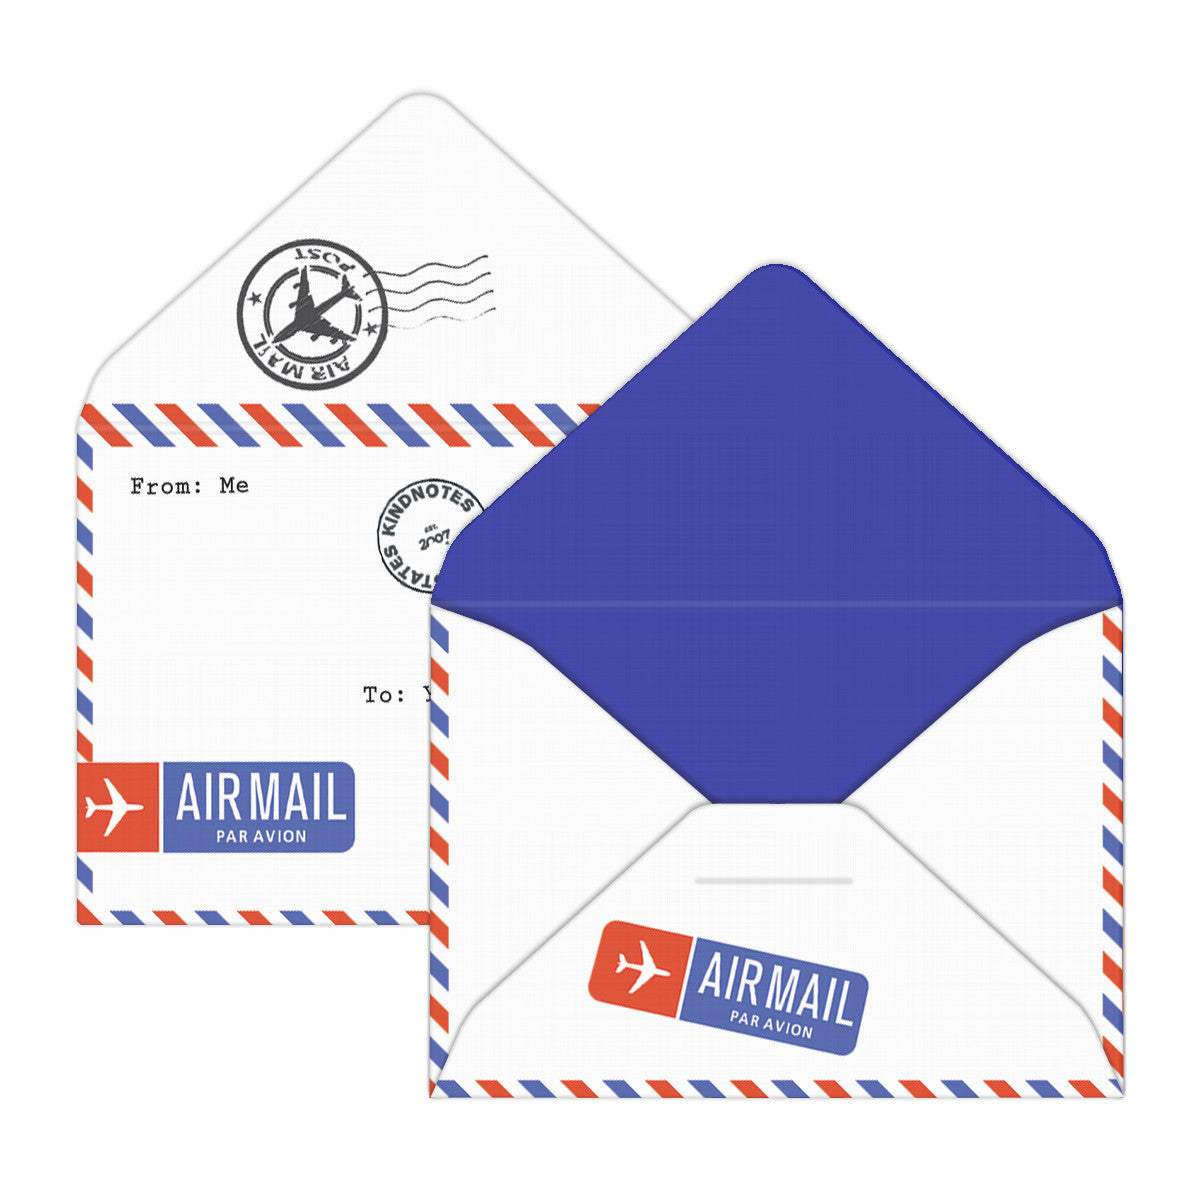 personal paper collection - airmail envelopes. - saturday morning vintage